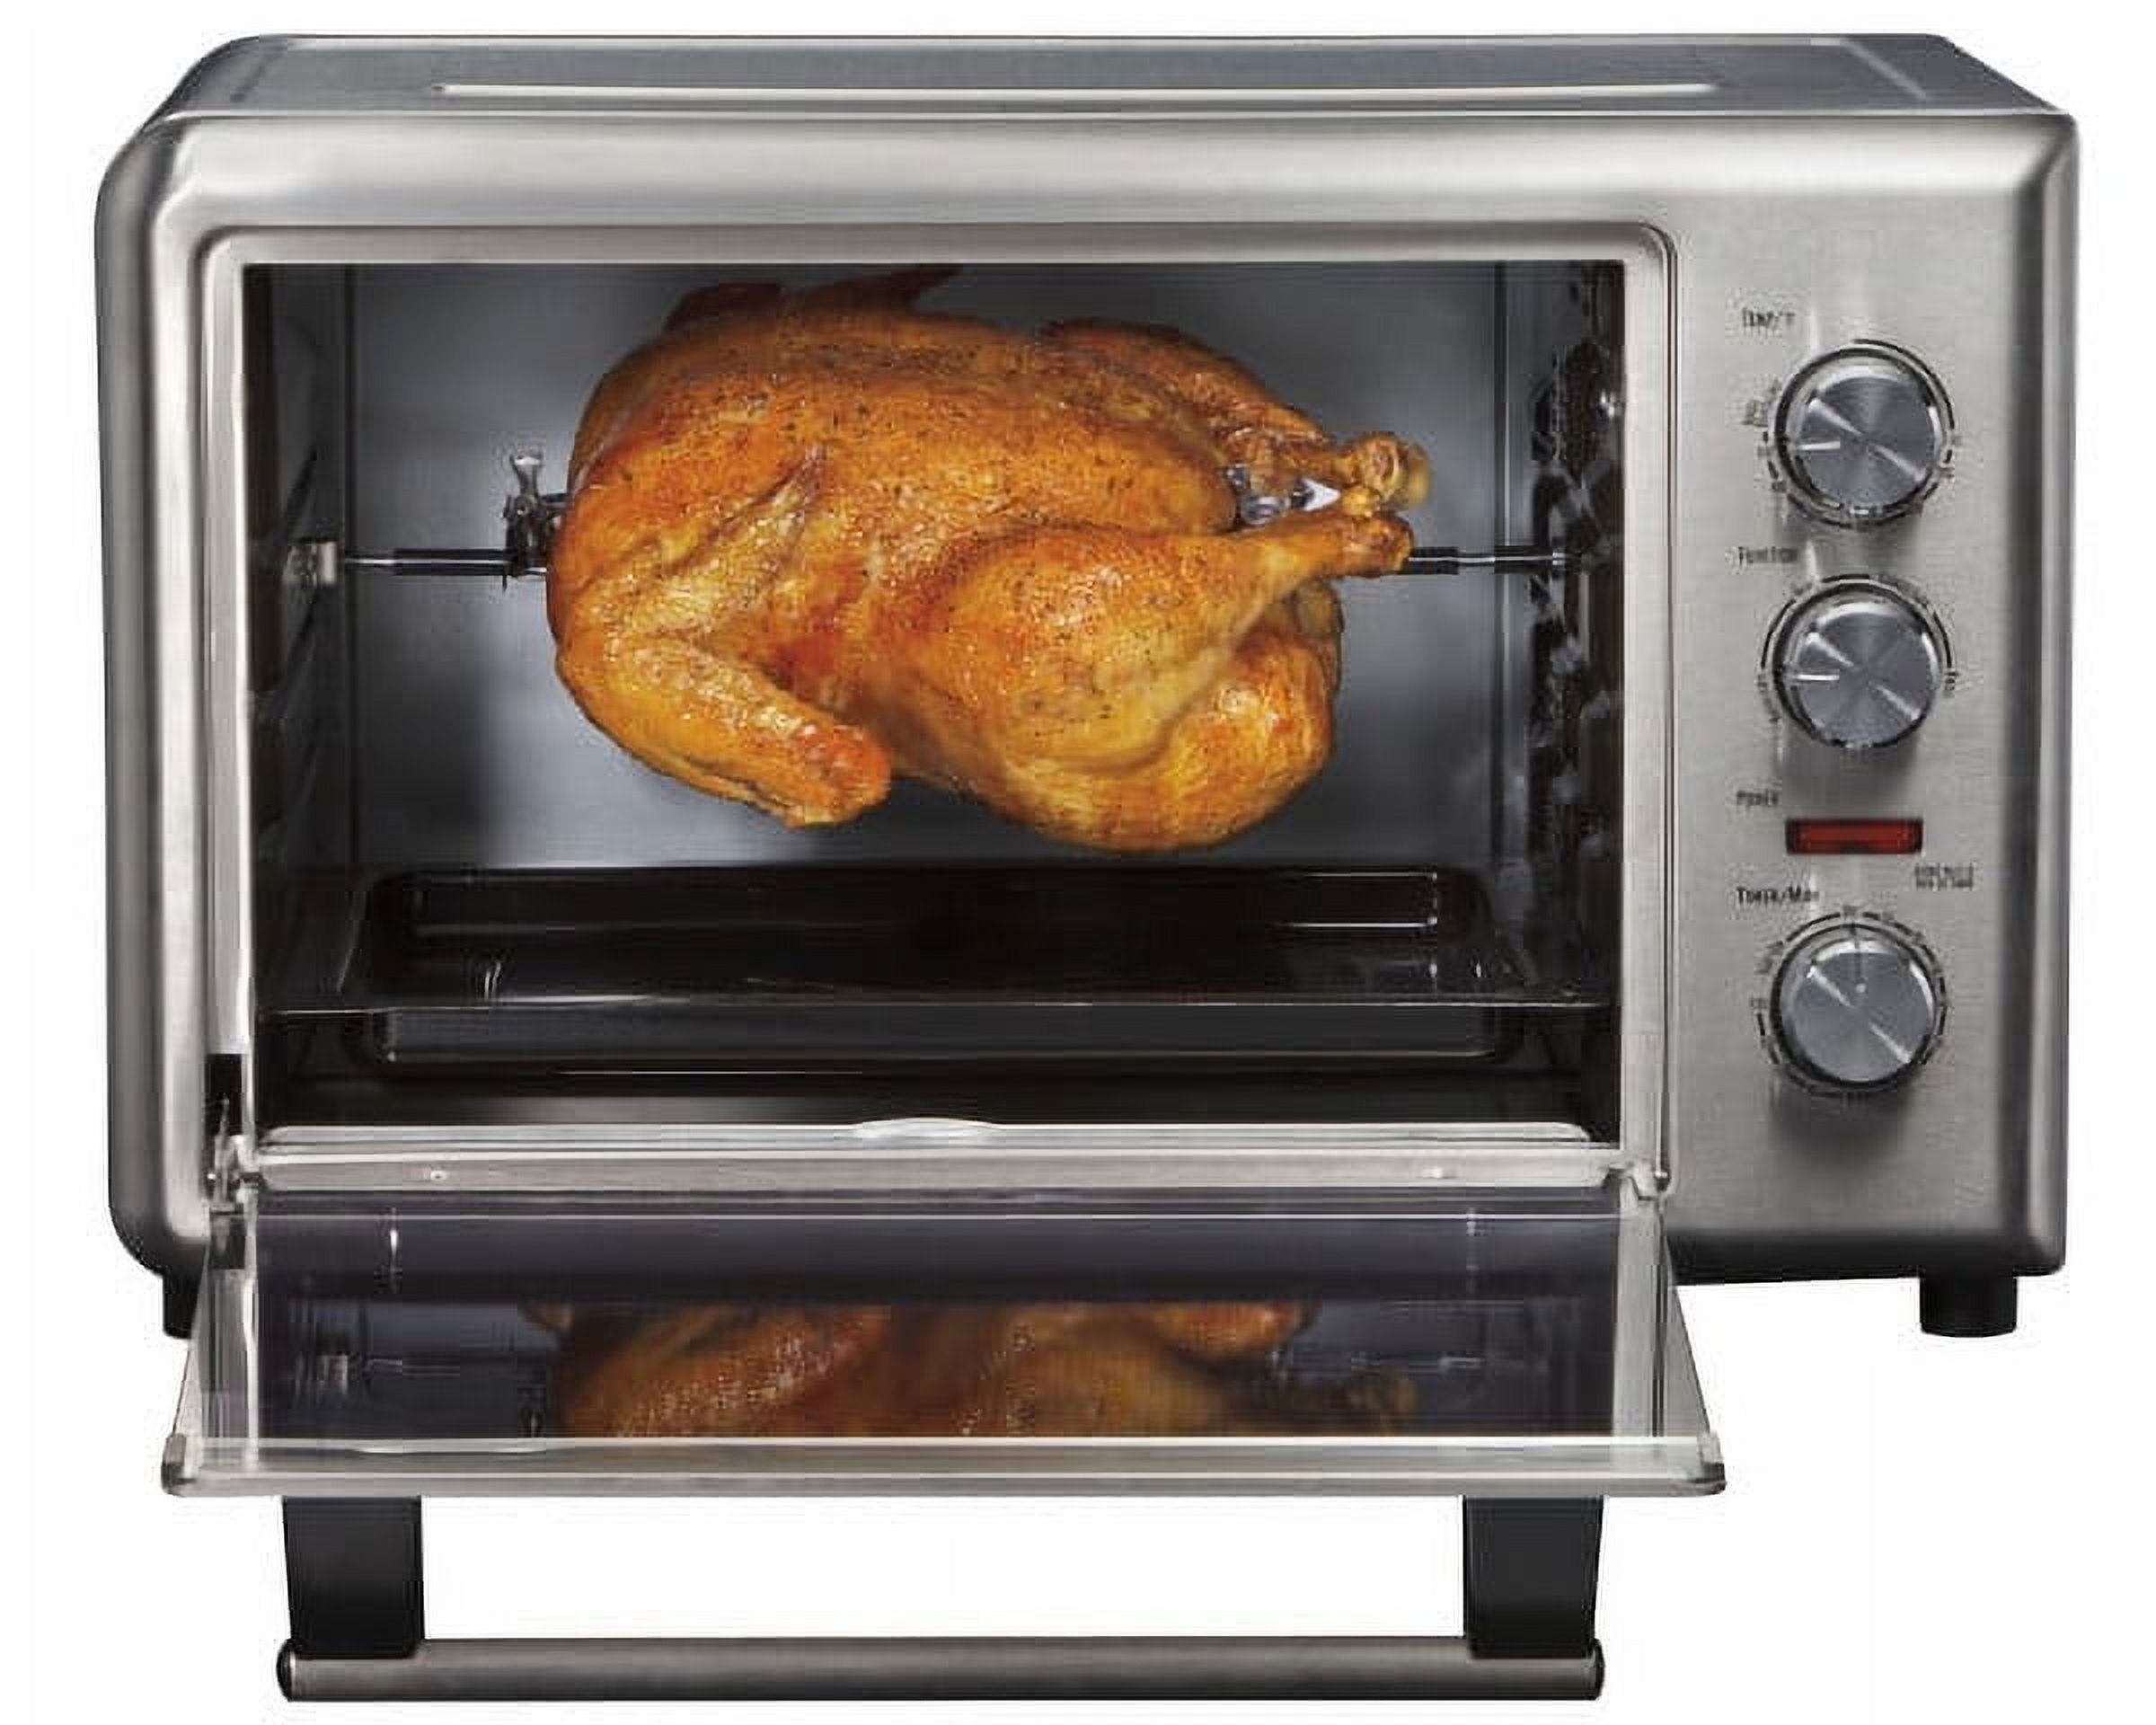 Hamilton Beach Countertop Oven with Convection and Rotisserie, Baking, Broil, Extra Large Capacity, Stainless Steel, 31103 - image 4 of 6